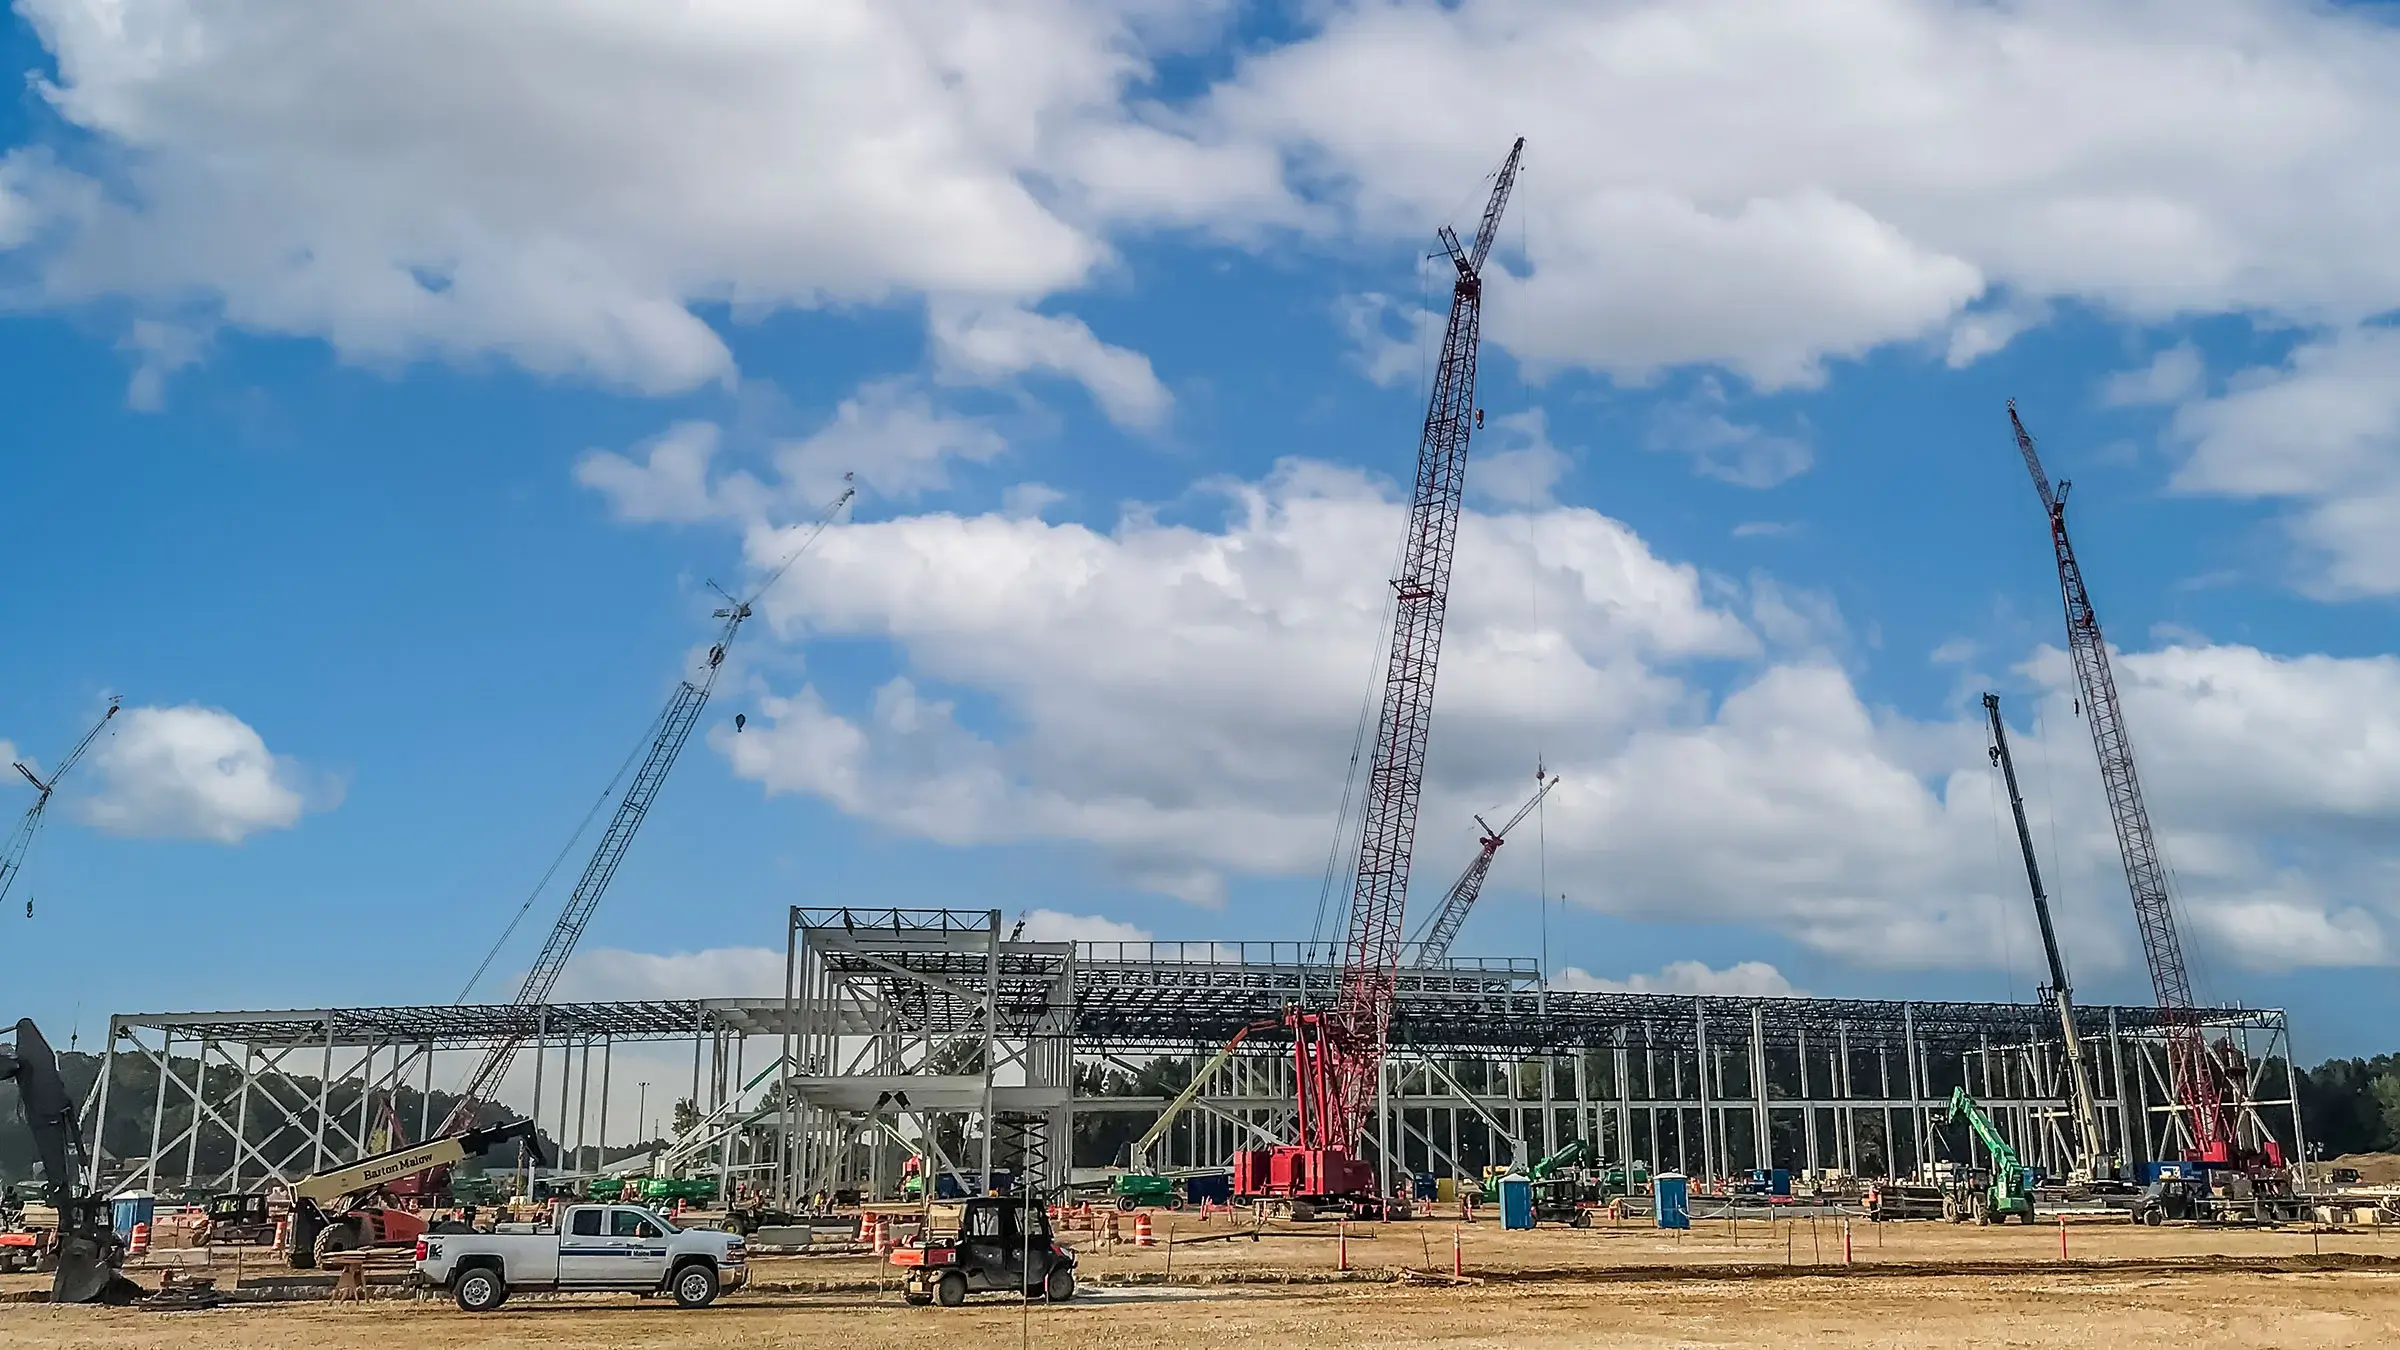 Large cranes and drilling equipment work on constructing a large battery facility plant.